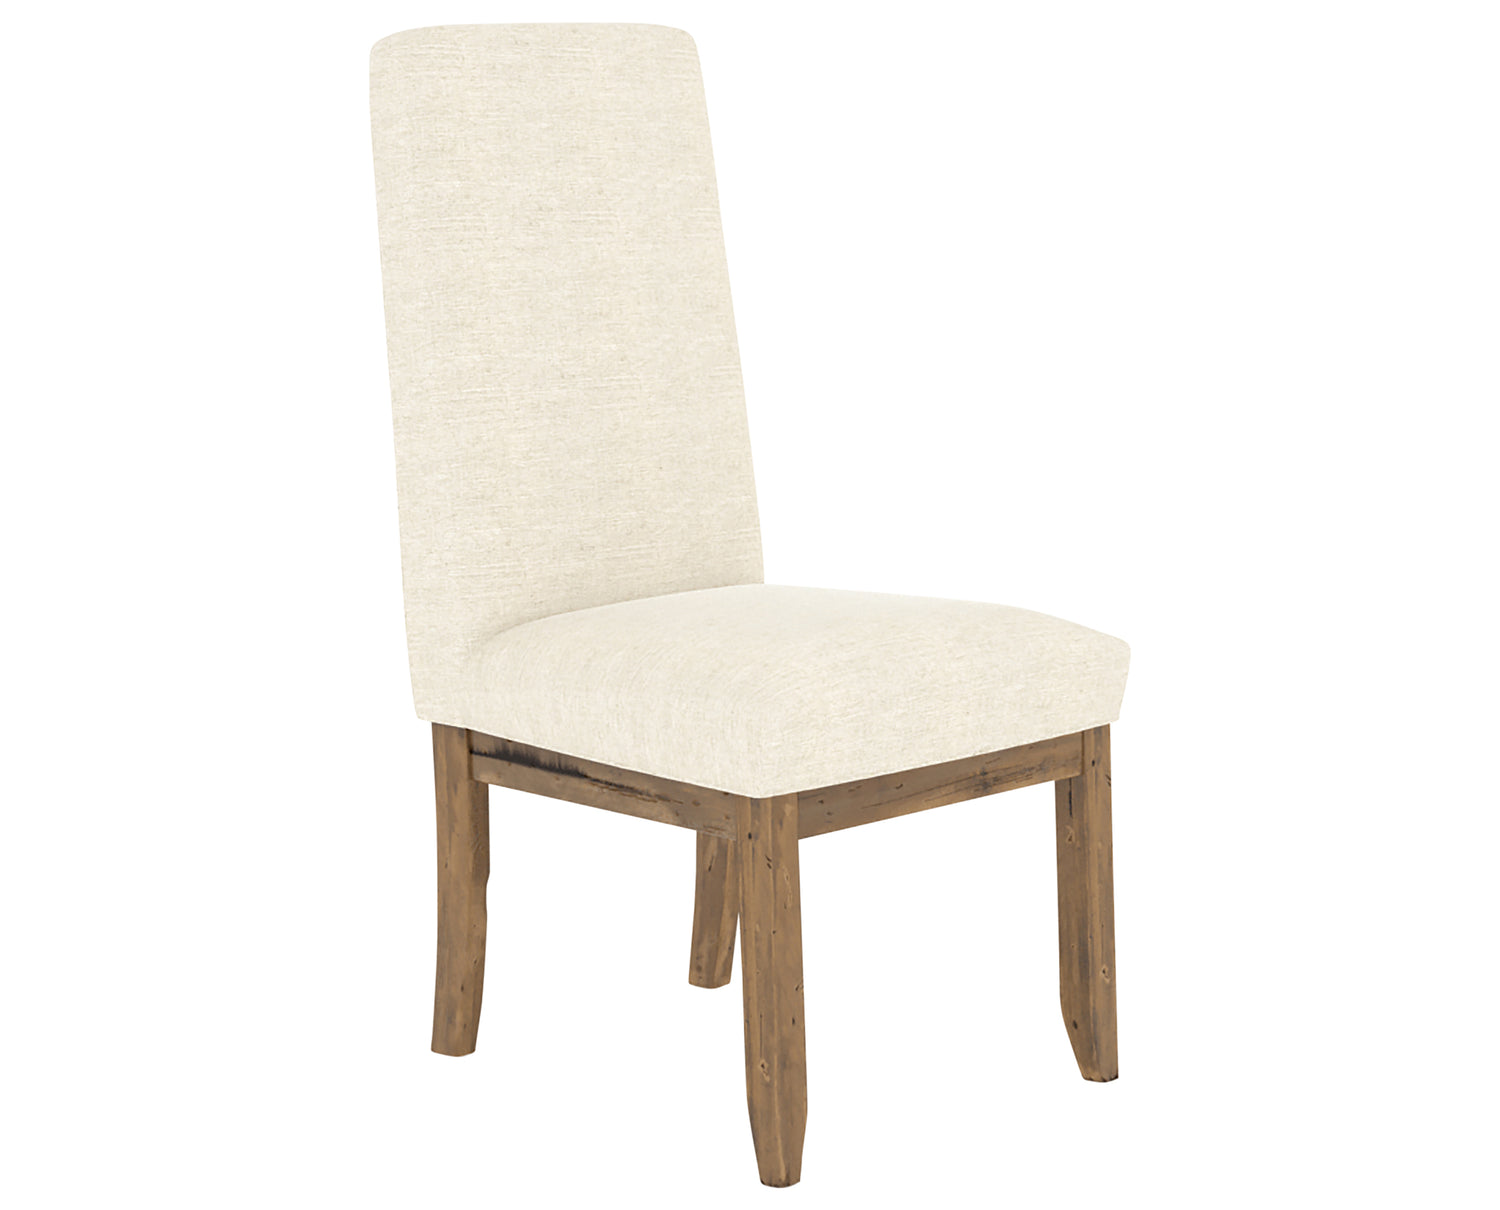 Oak Washed & Fabric TW | Canadel Champlain Dining Chair 0138 | Valley Ridge Furniture